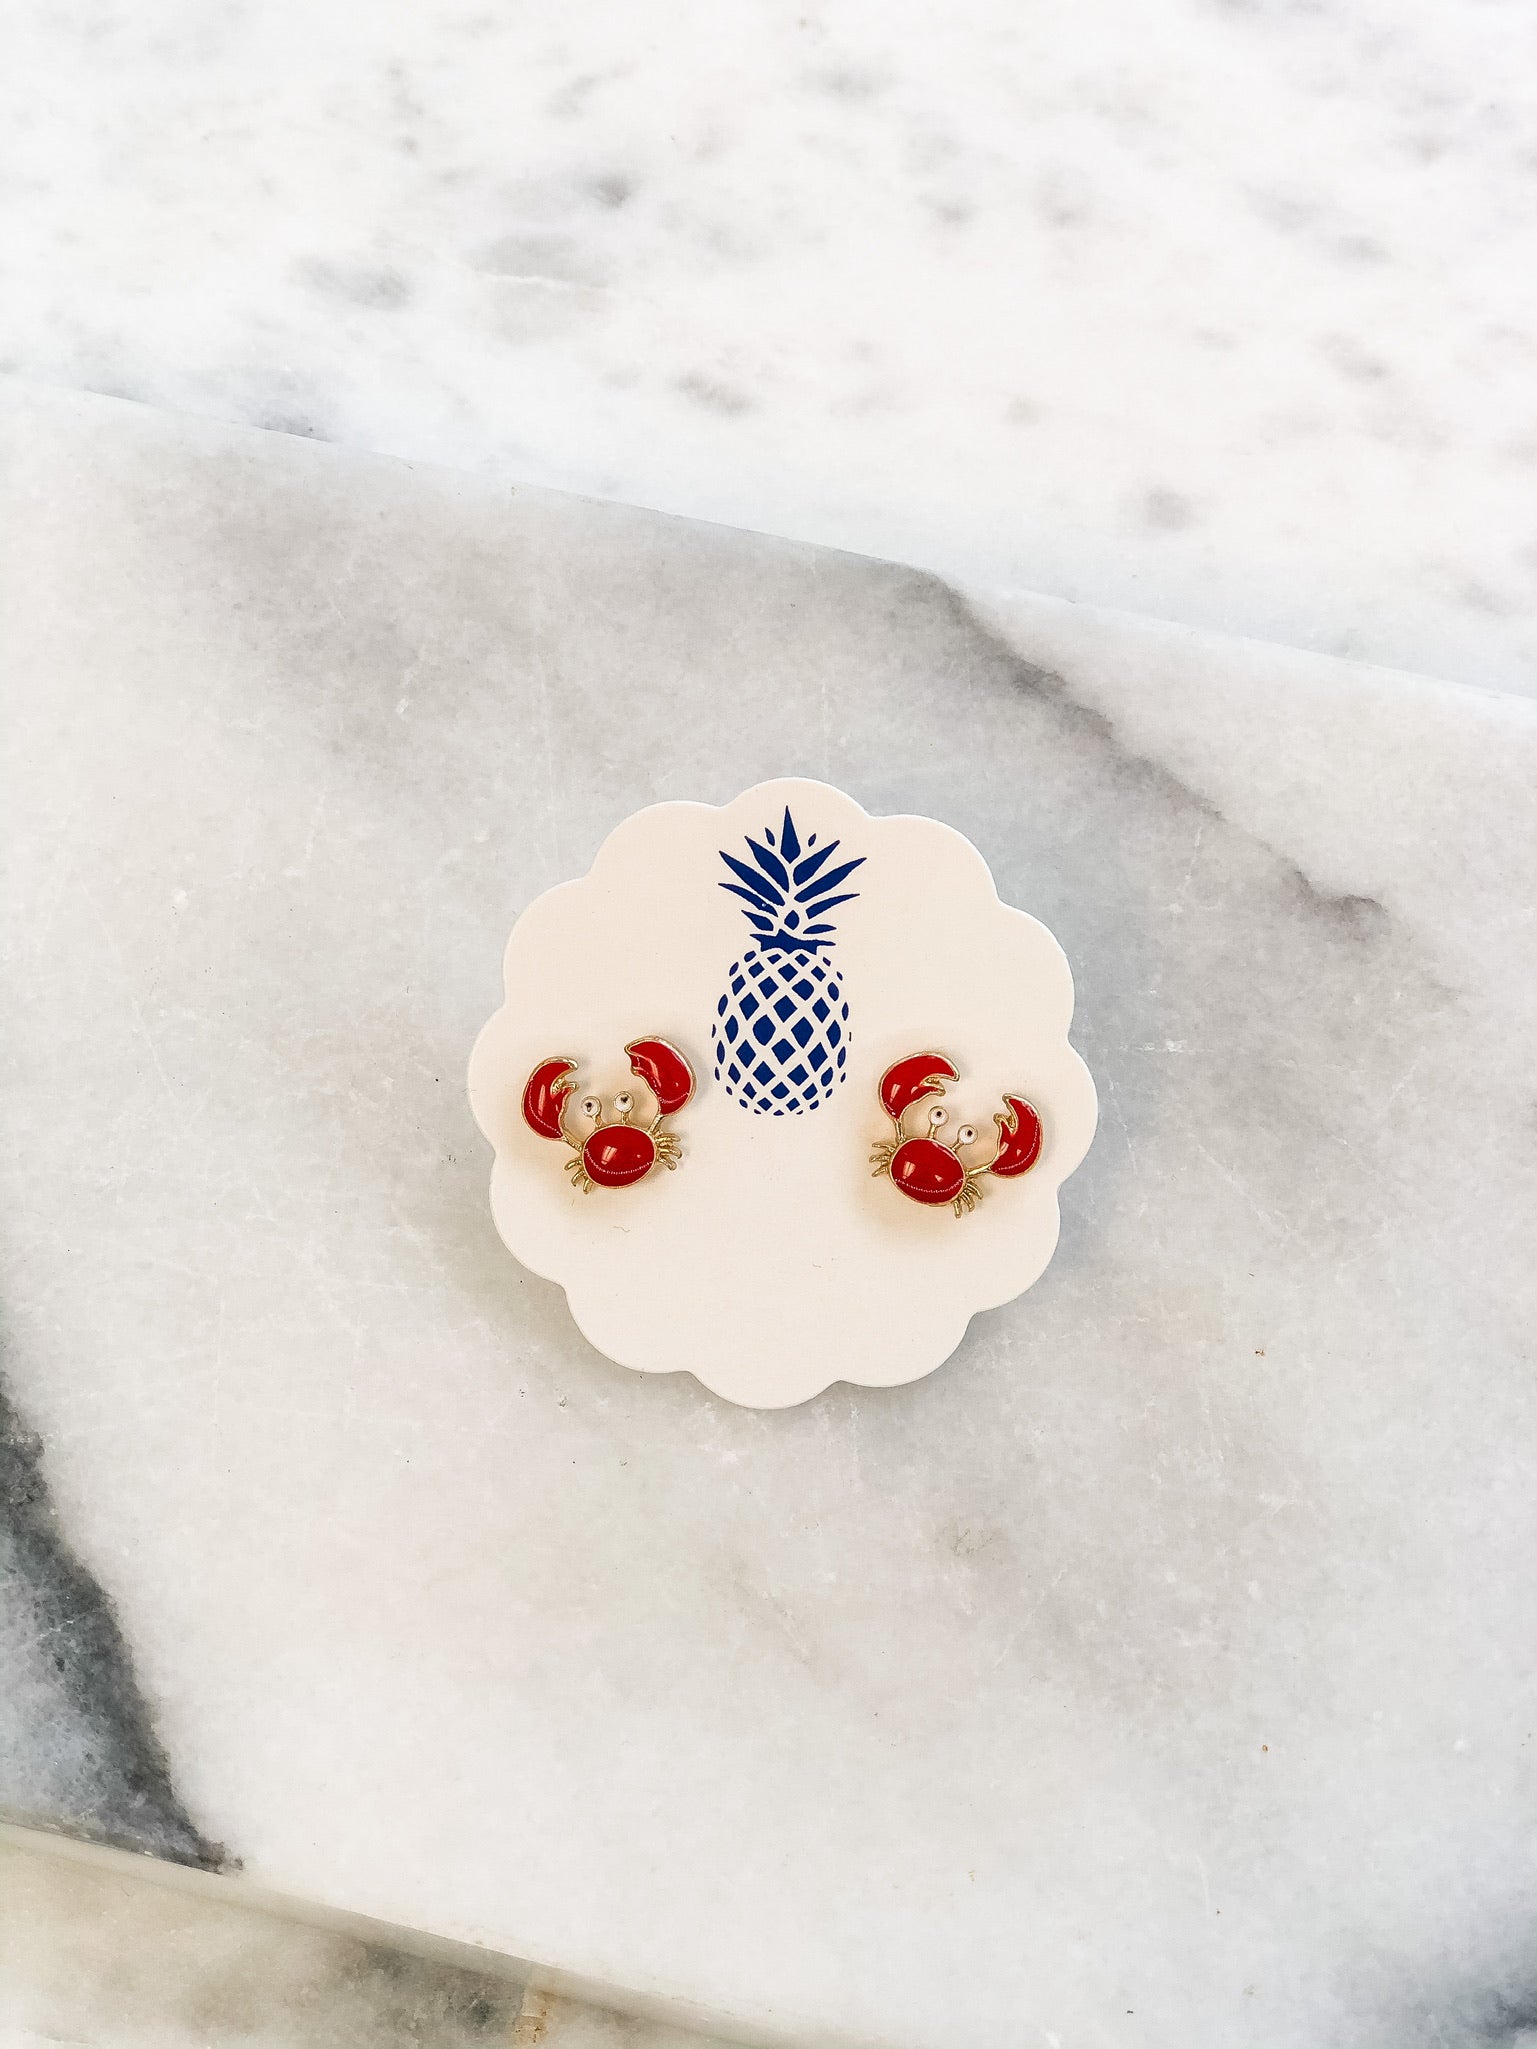 Crab Signature Enamel Studs by Prep Obsessed